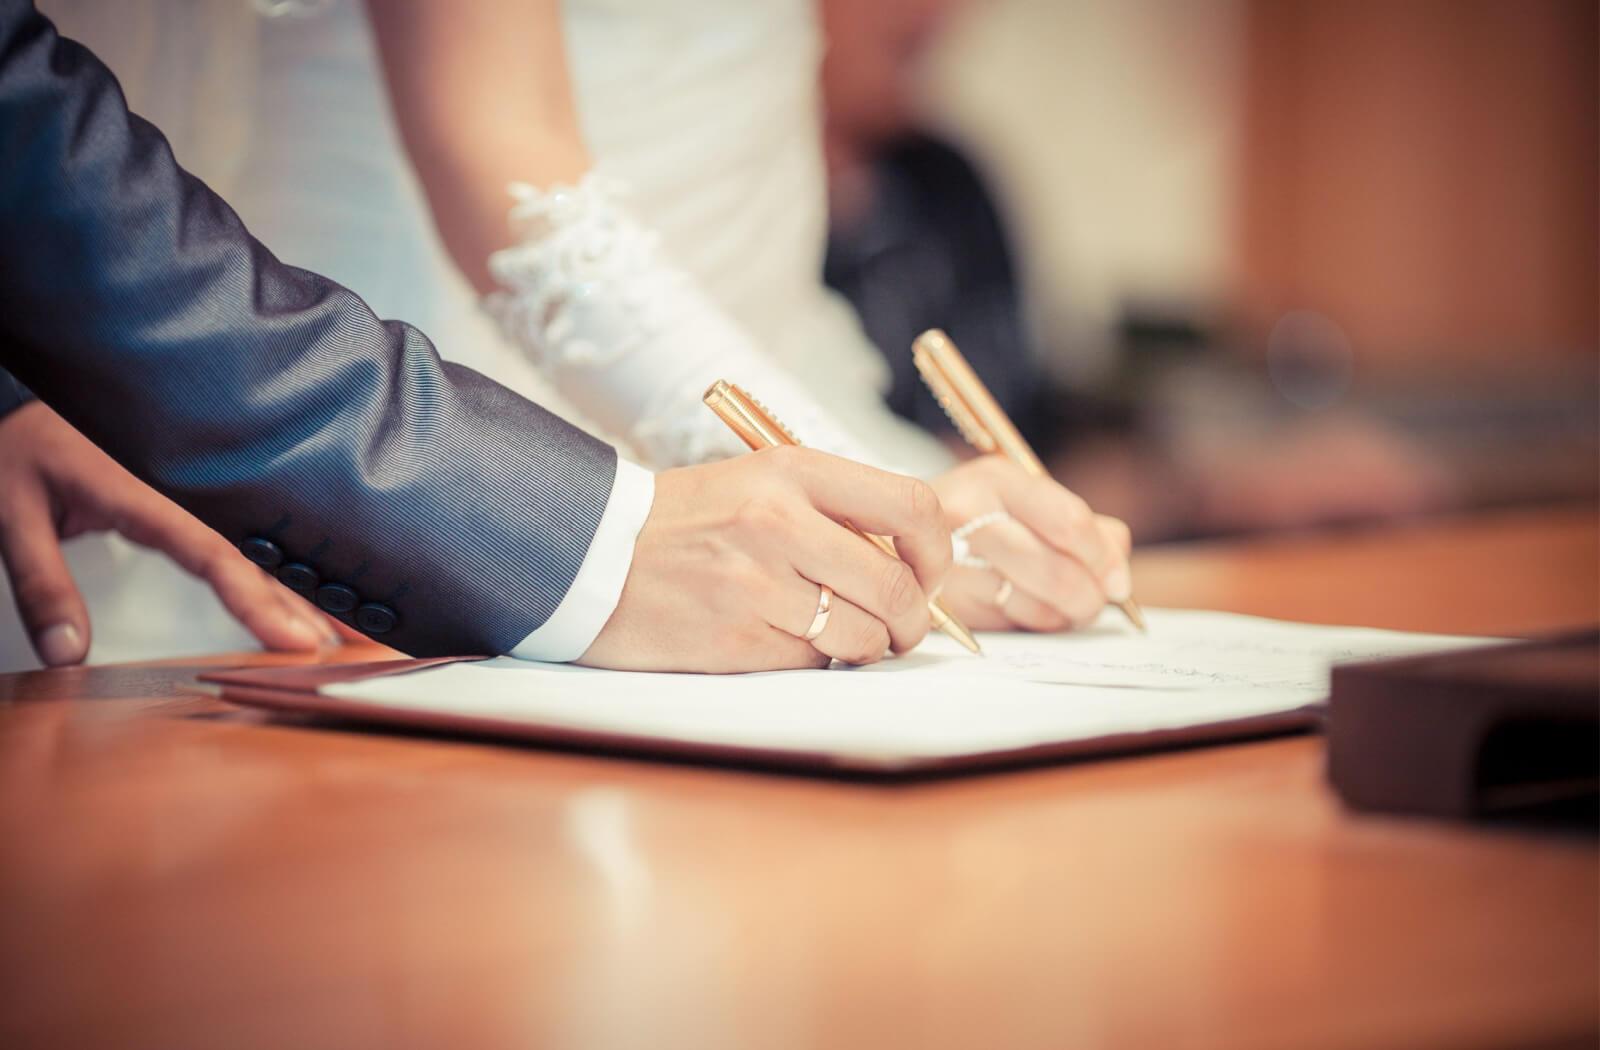 A man's right arm is in a blue colored sleeve and a woman's right hand is in a white wedding glove and both holding a golden coloured pen and signing a marriage contract on the table.